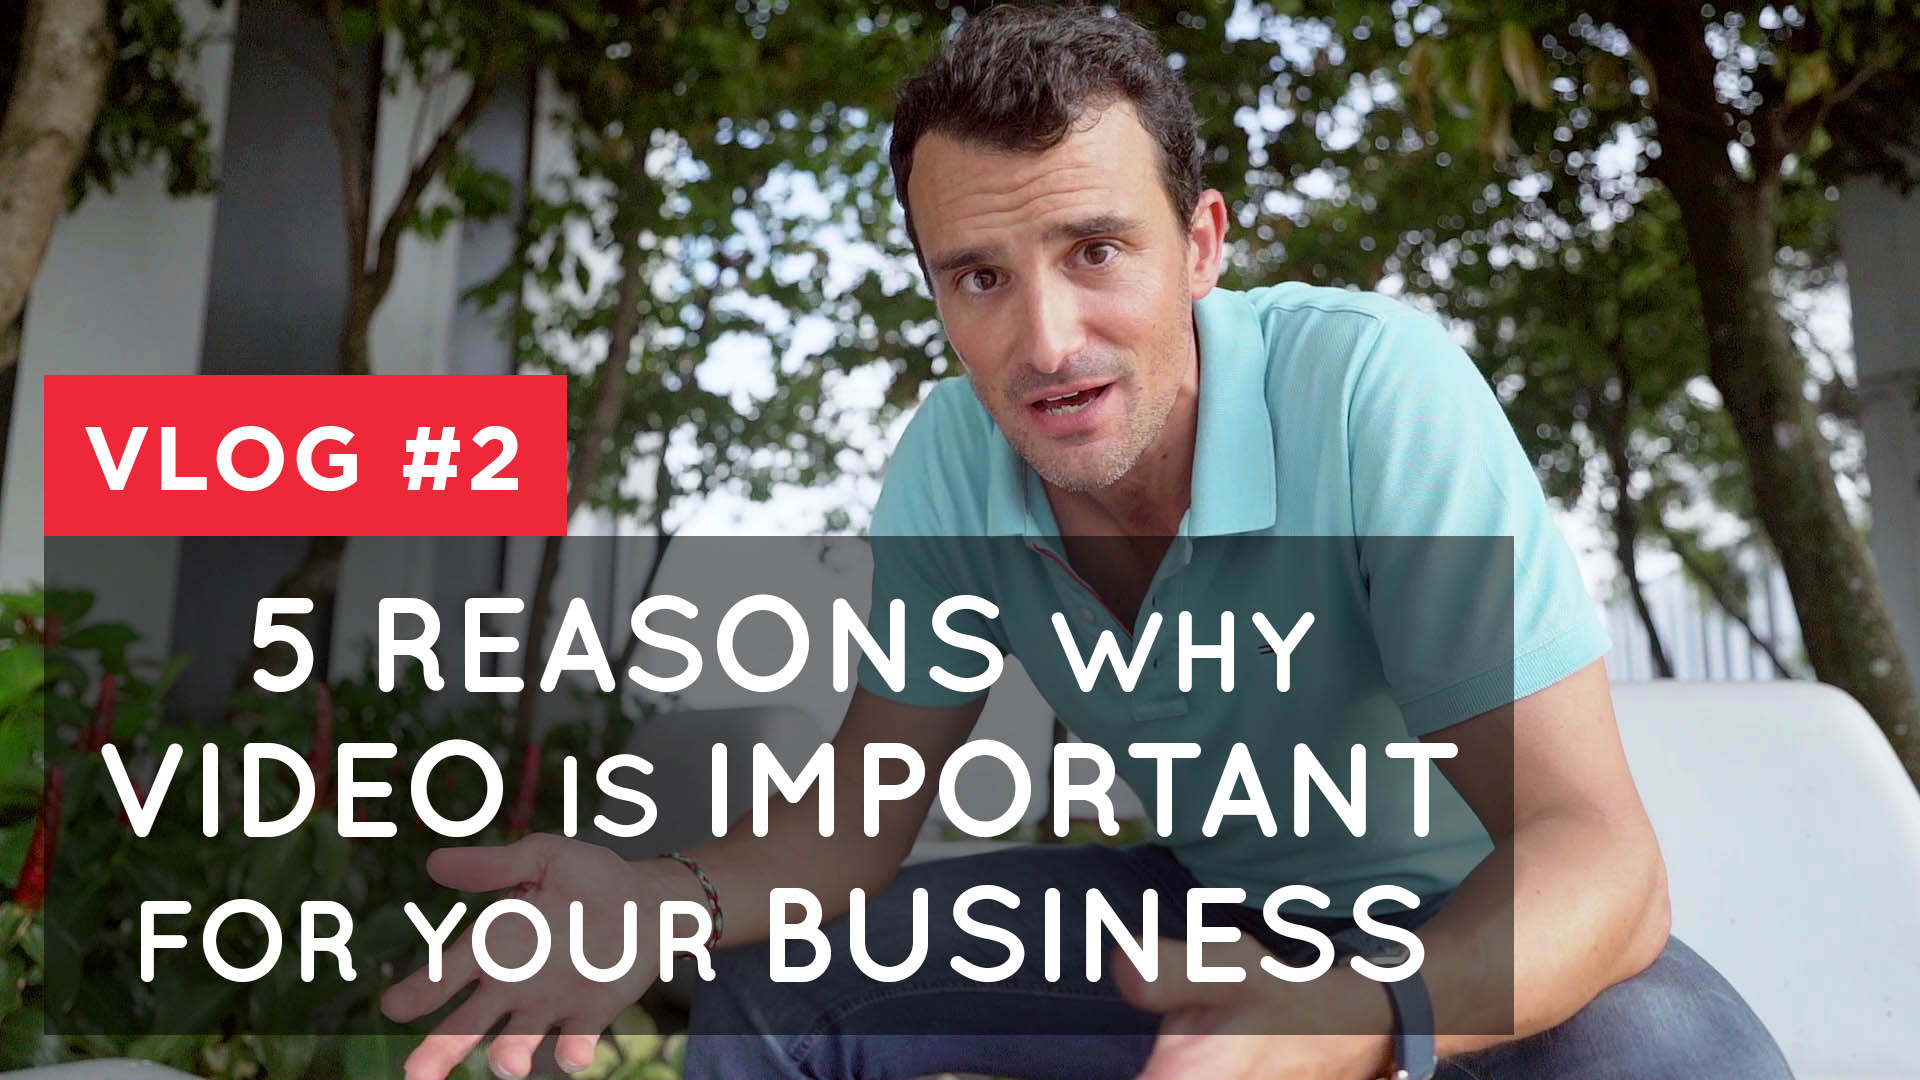 5 reasons why video is important for your business